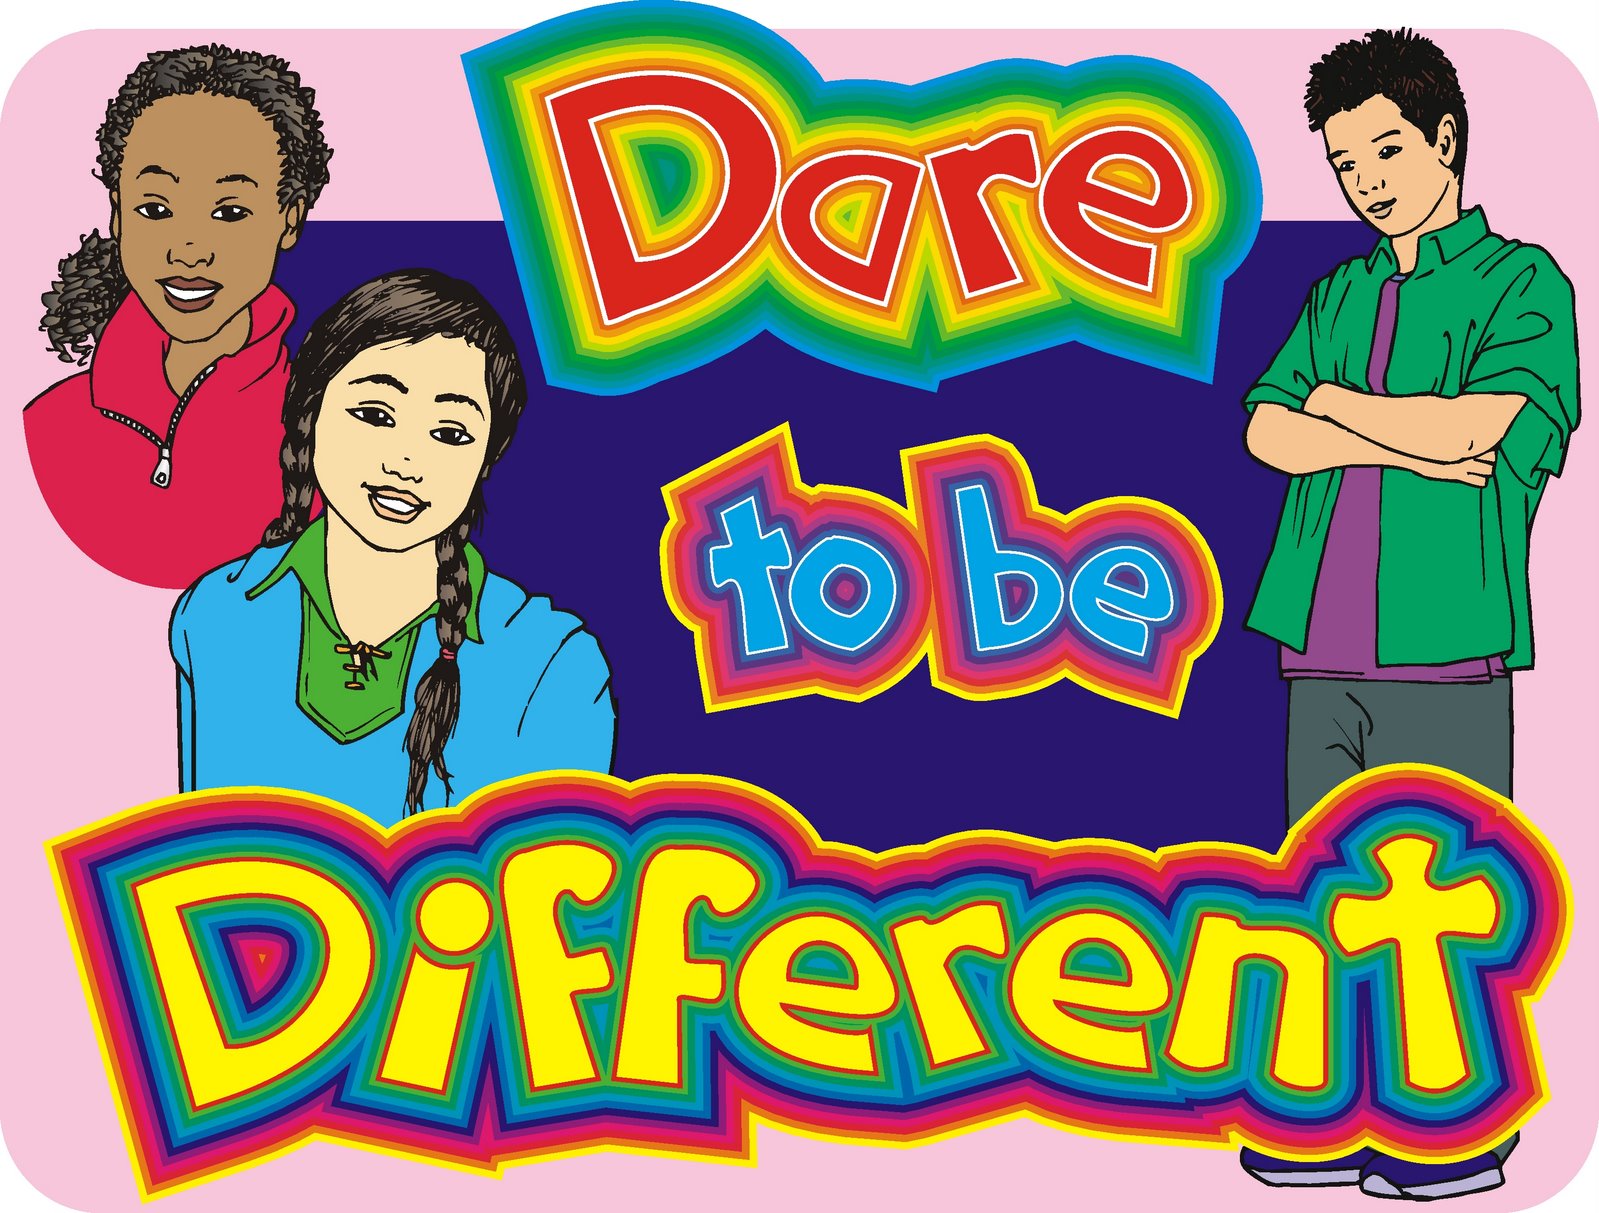 [07-11+Dare+to+be+different-1.jpg]